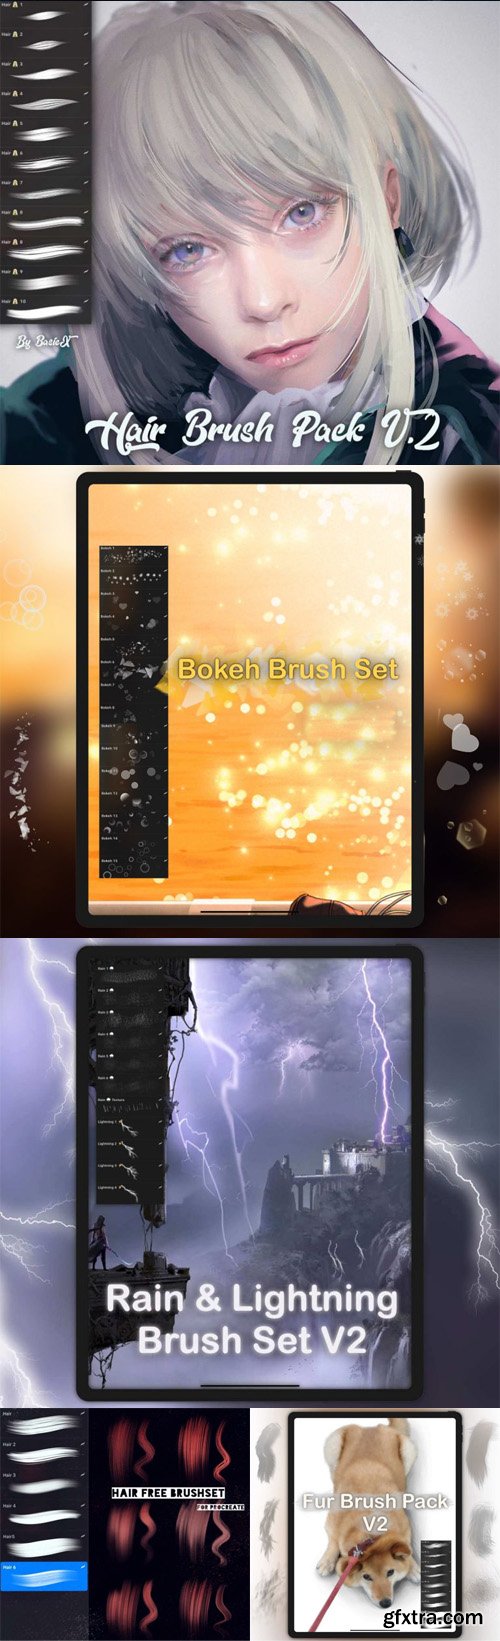 9 Awesome Procreate Brushes Pack [Vol.2]